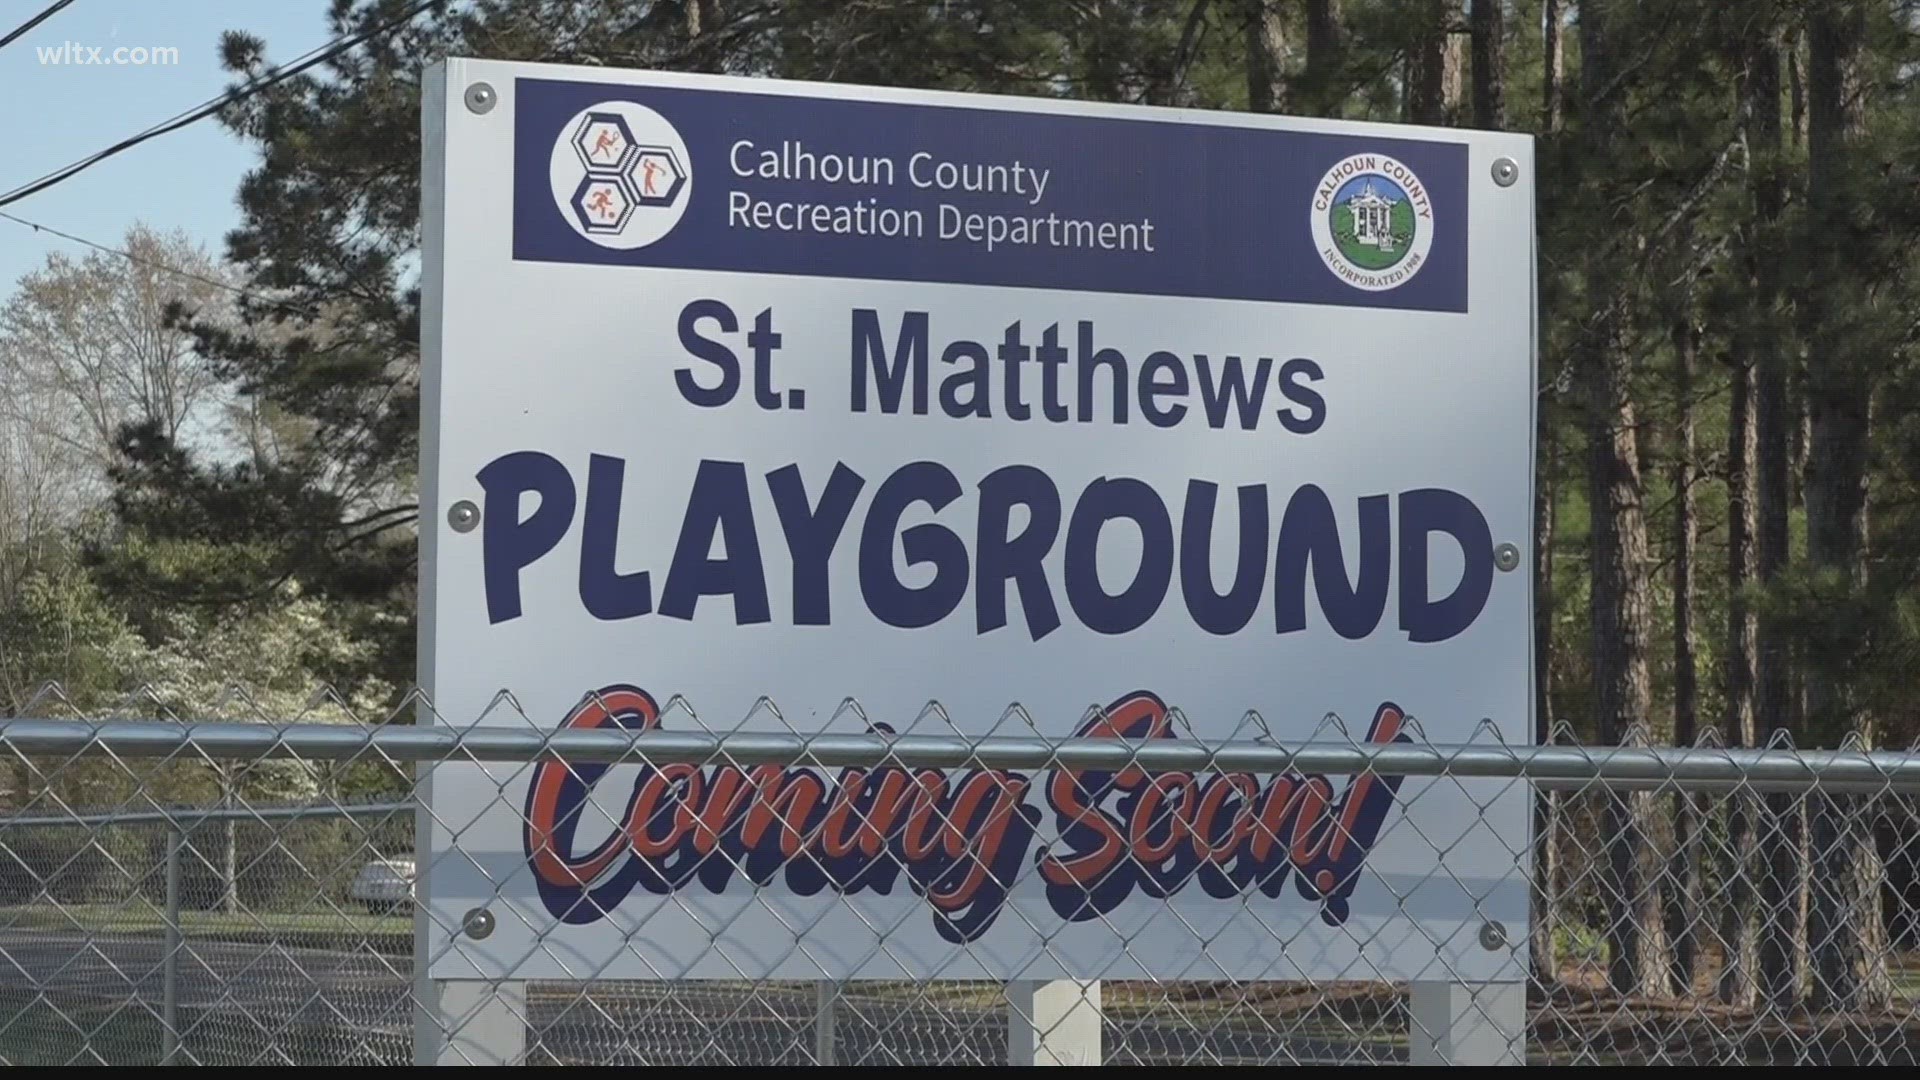 Construction of a new playground is underway in the Town of St. Matthews. The project is being spearheaded by the Calhoun County Parks and Recreation Department.